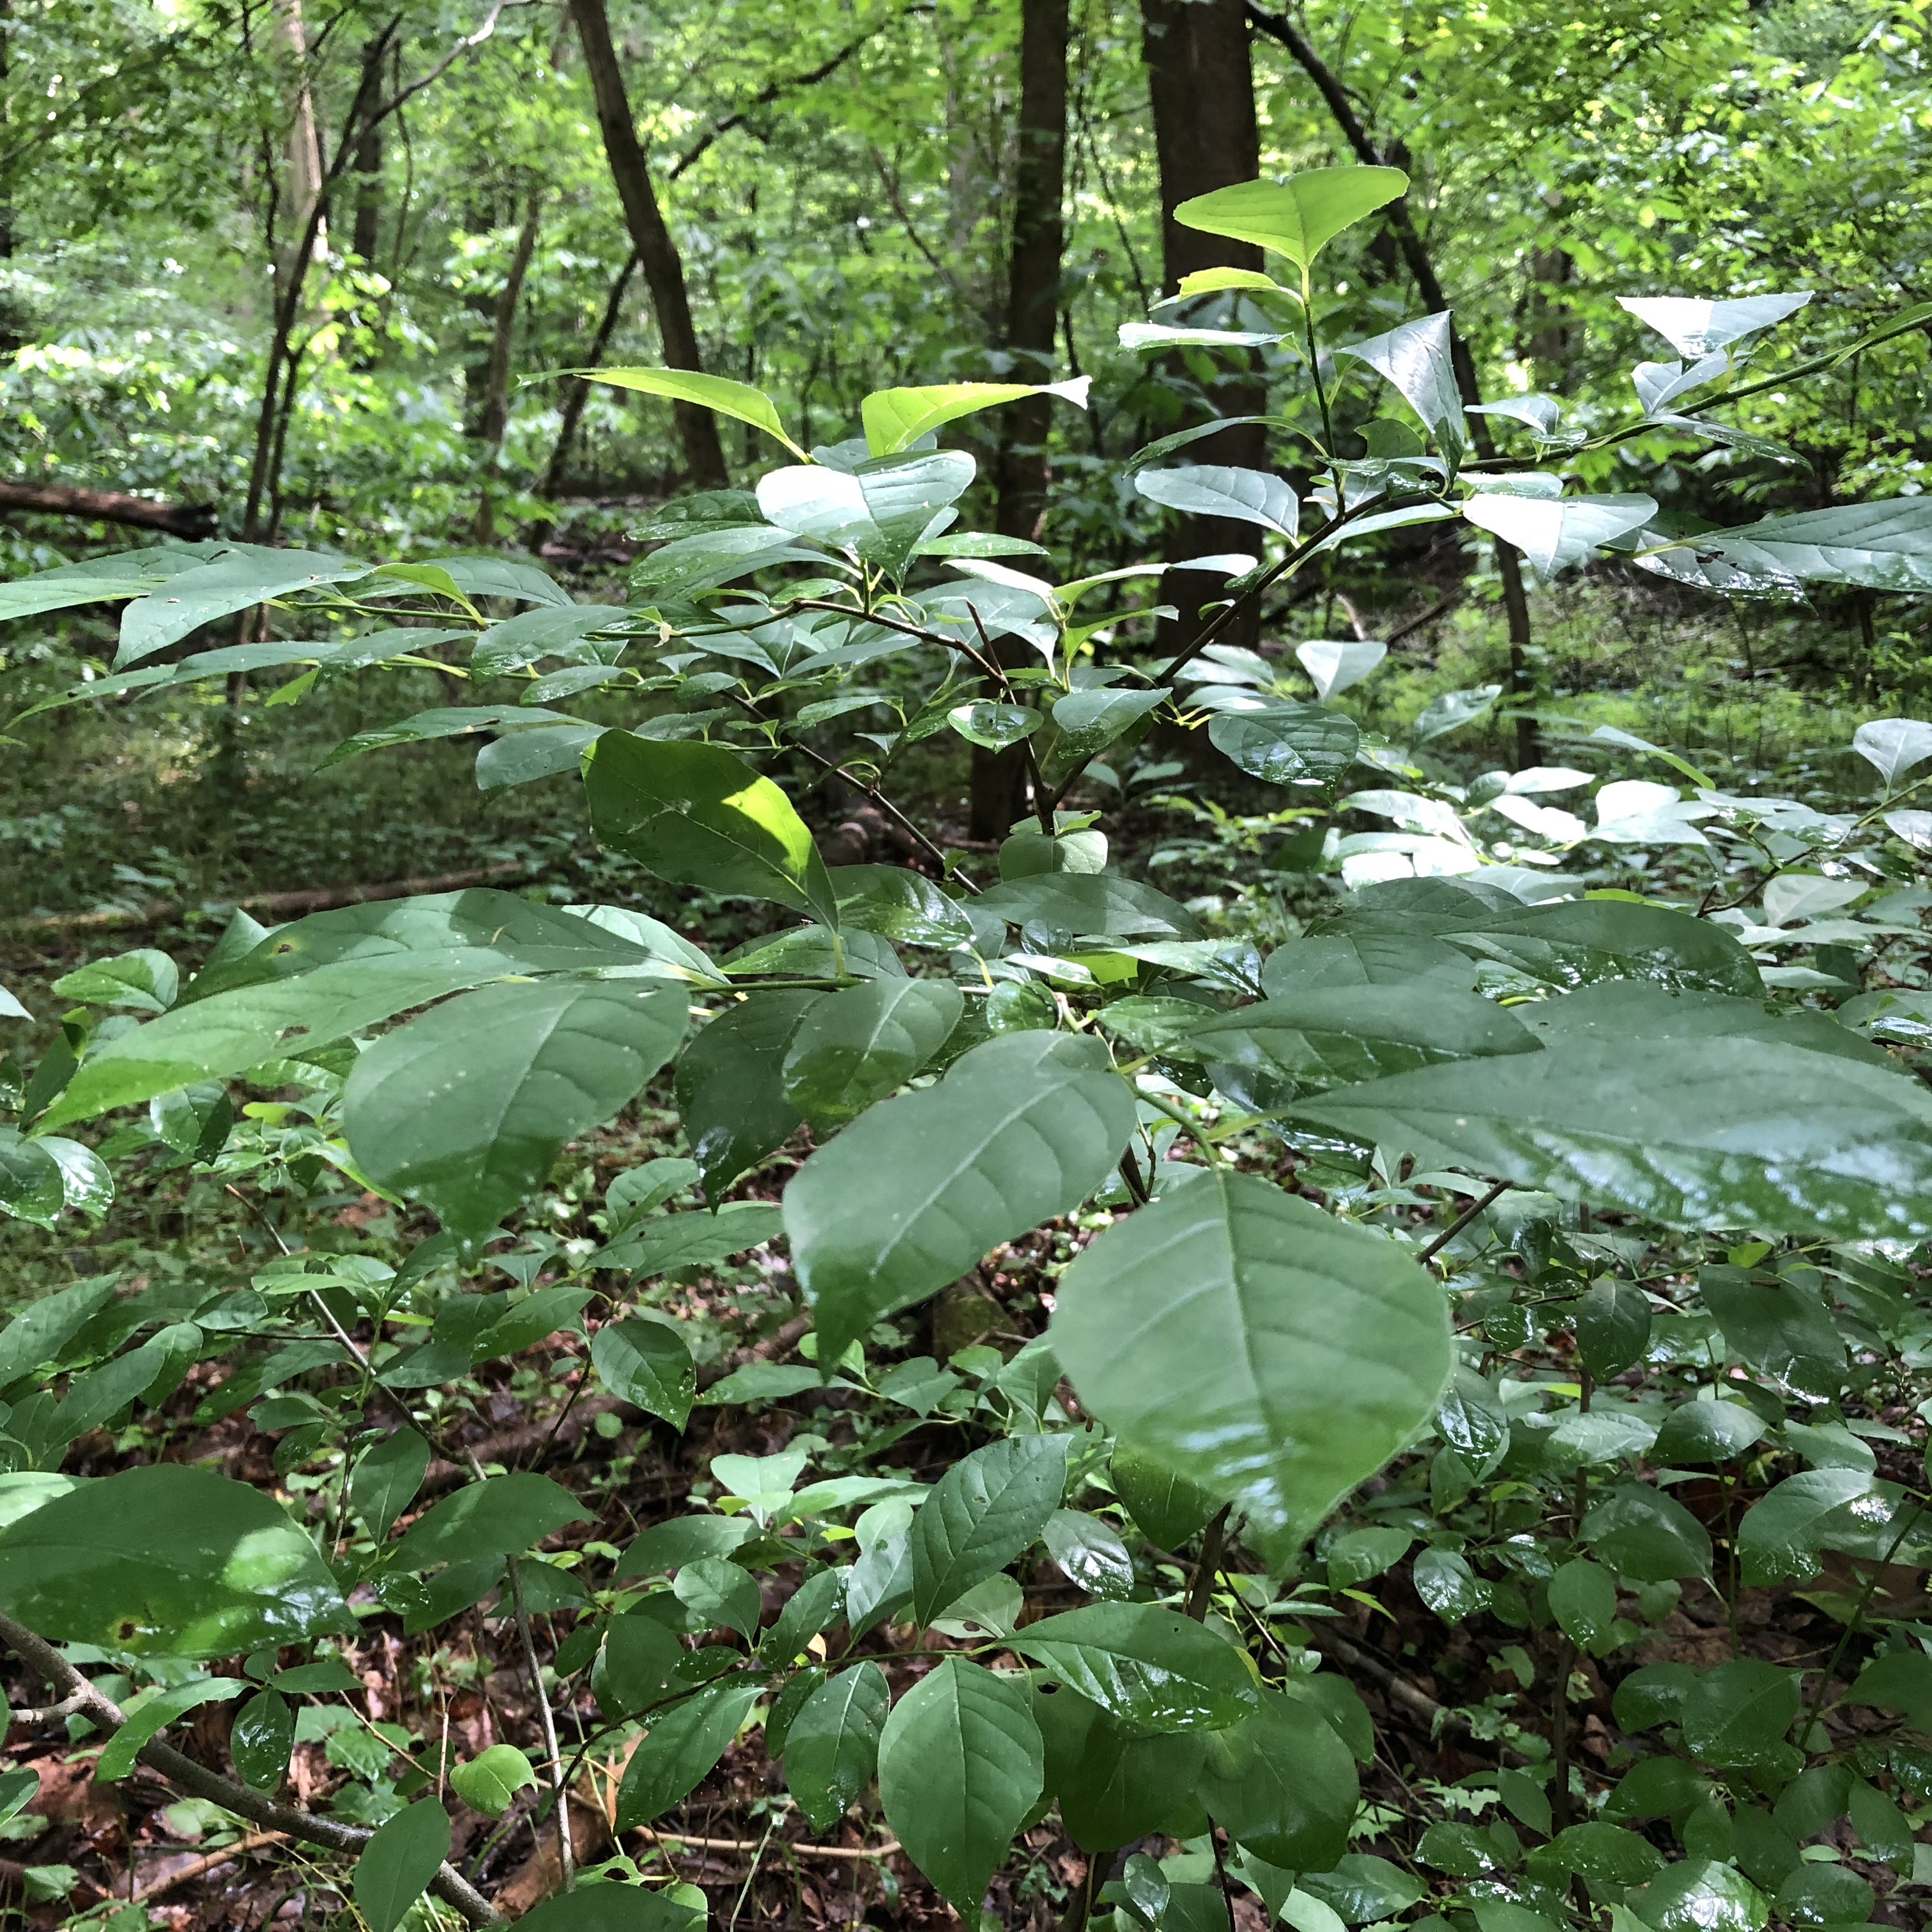 Paw Paw leaves in the forest understory